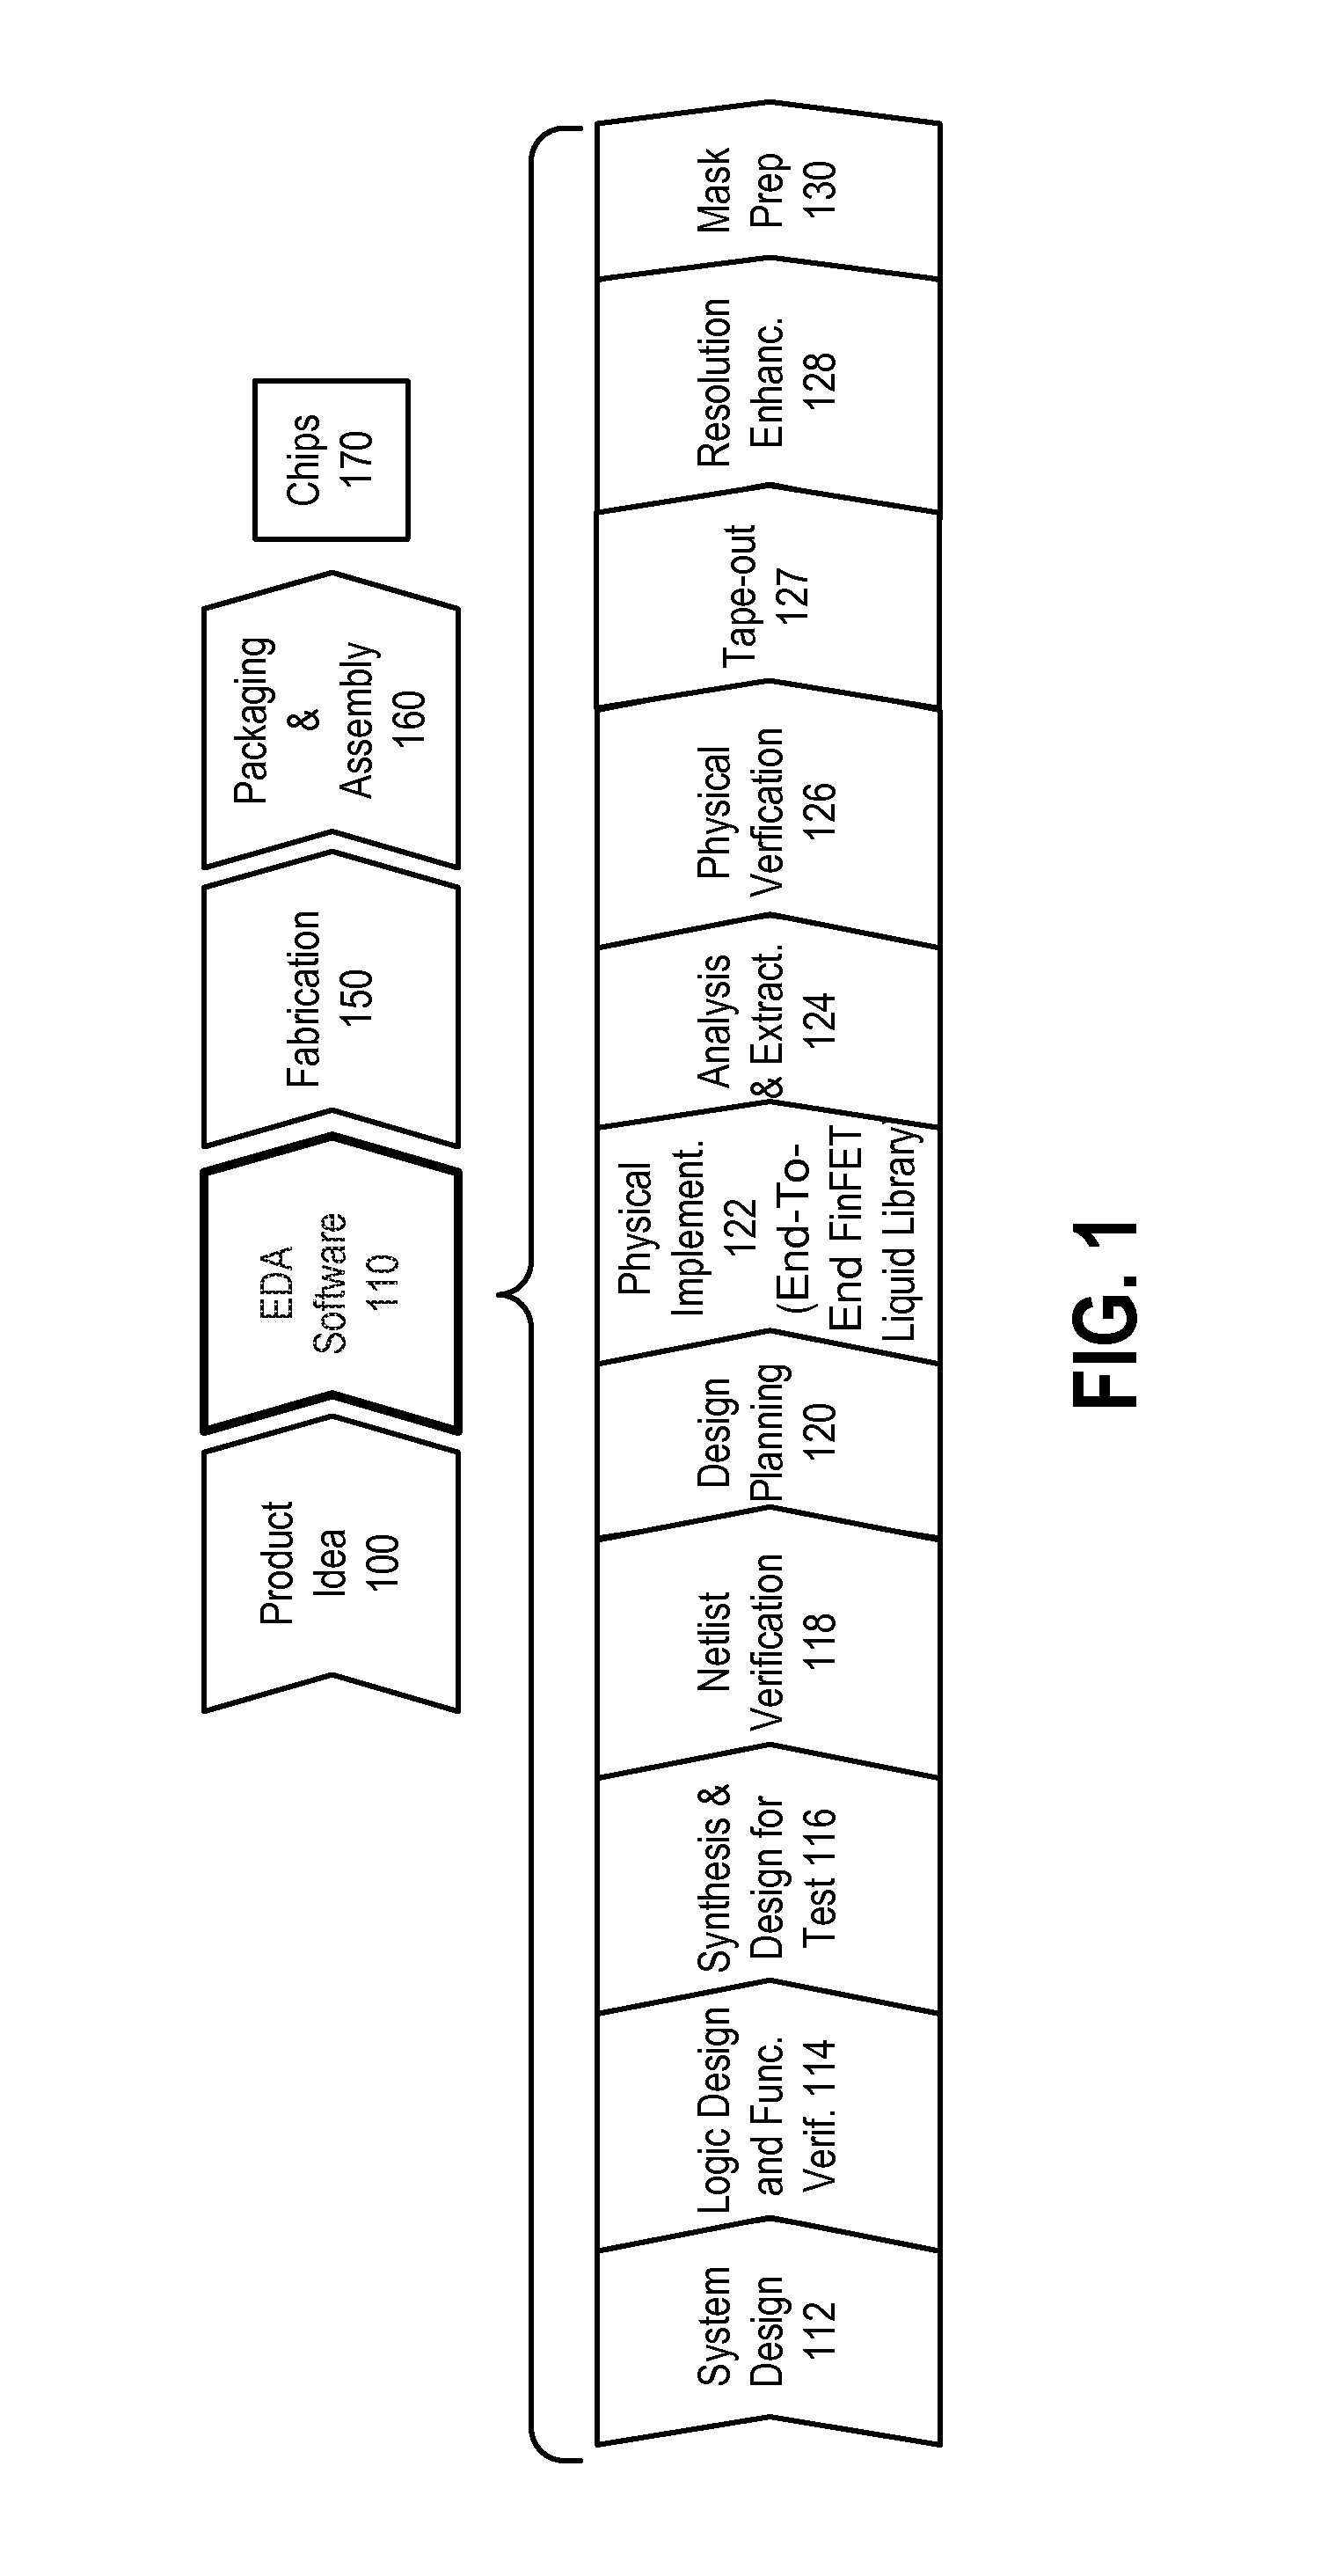 N-channel and p-channel end-to-end finfet cell architecture with relaxed gate pitch